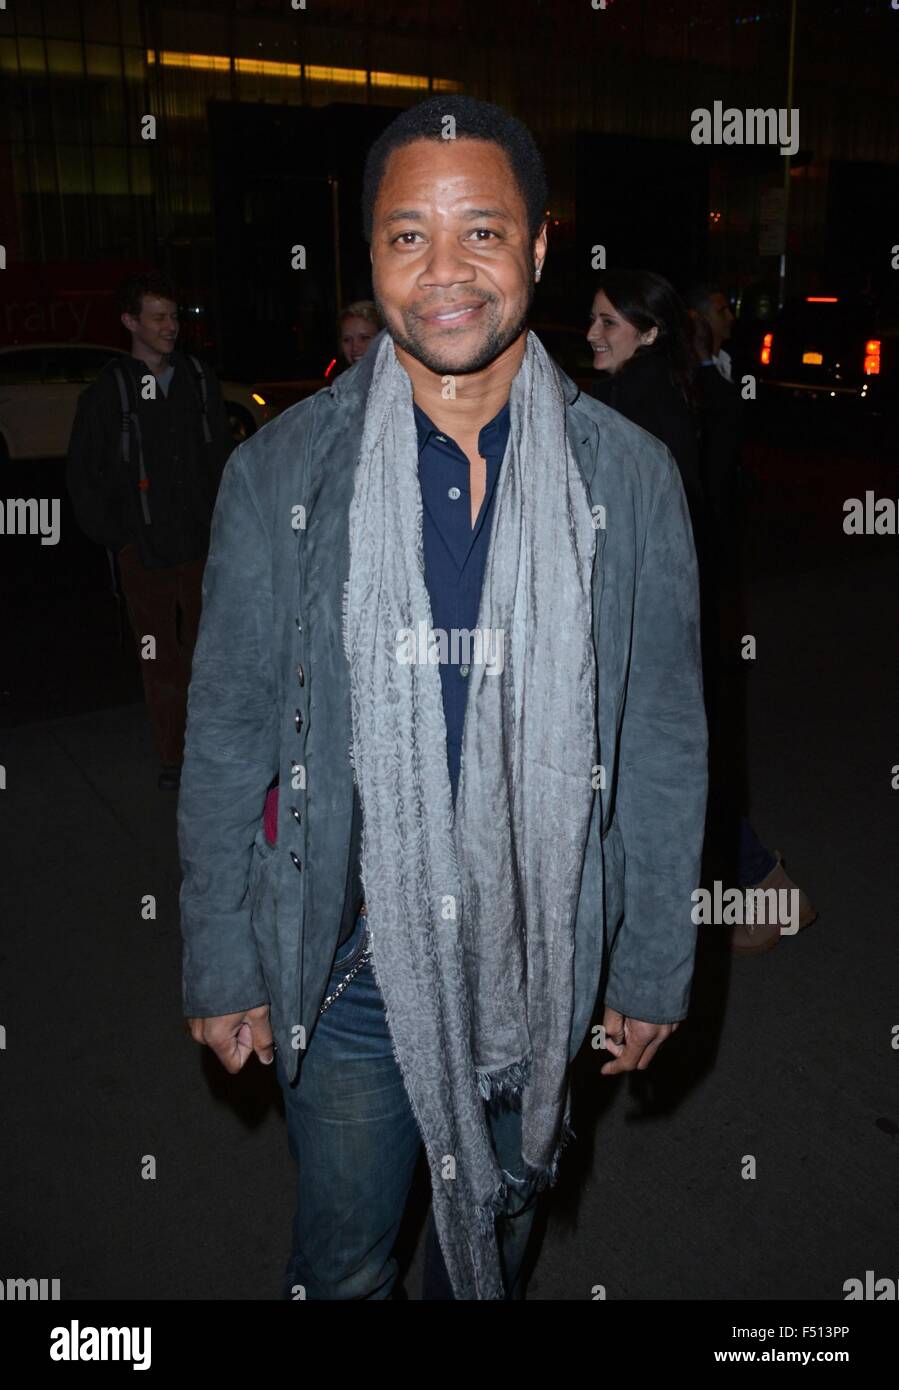 New York, NY, USA. 25th Oct, 2015. Cuba Gooding Jr. at arrivals for MISS YOU ALREADY Premiere, Museum of Modern Art (MoMA), New York, NY October 25, 2015. Credit:  Derek Storm/Everett Collection/Alamy Live News Stock Photo